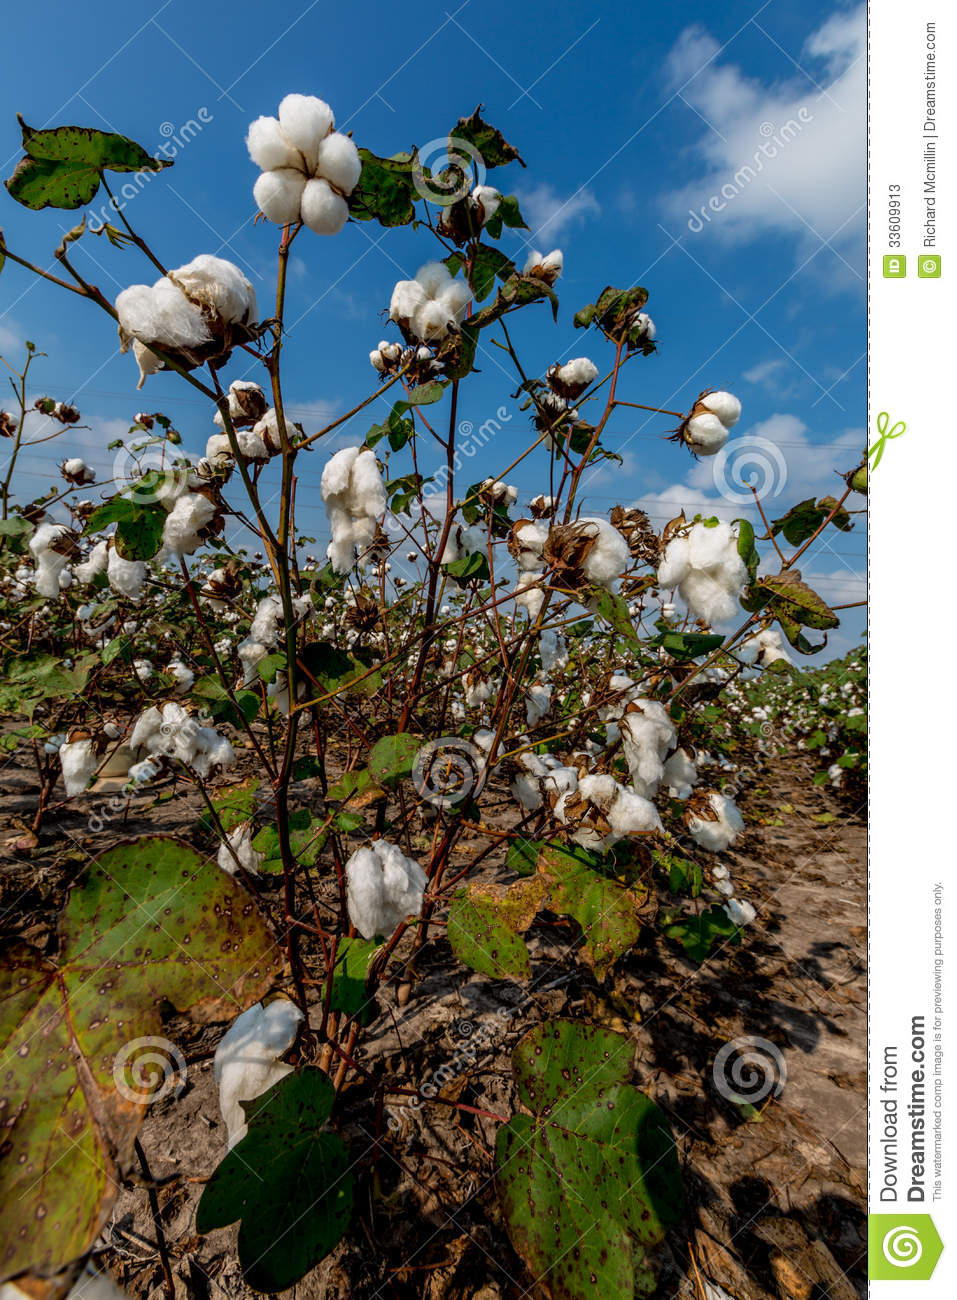 Cotton Growing In A Cotton Field  Cotton Bolls Growing On The Stalk